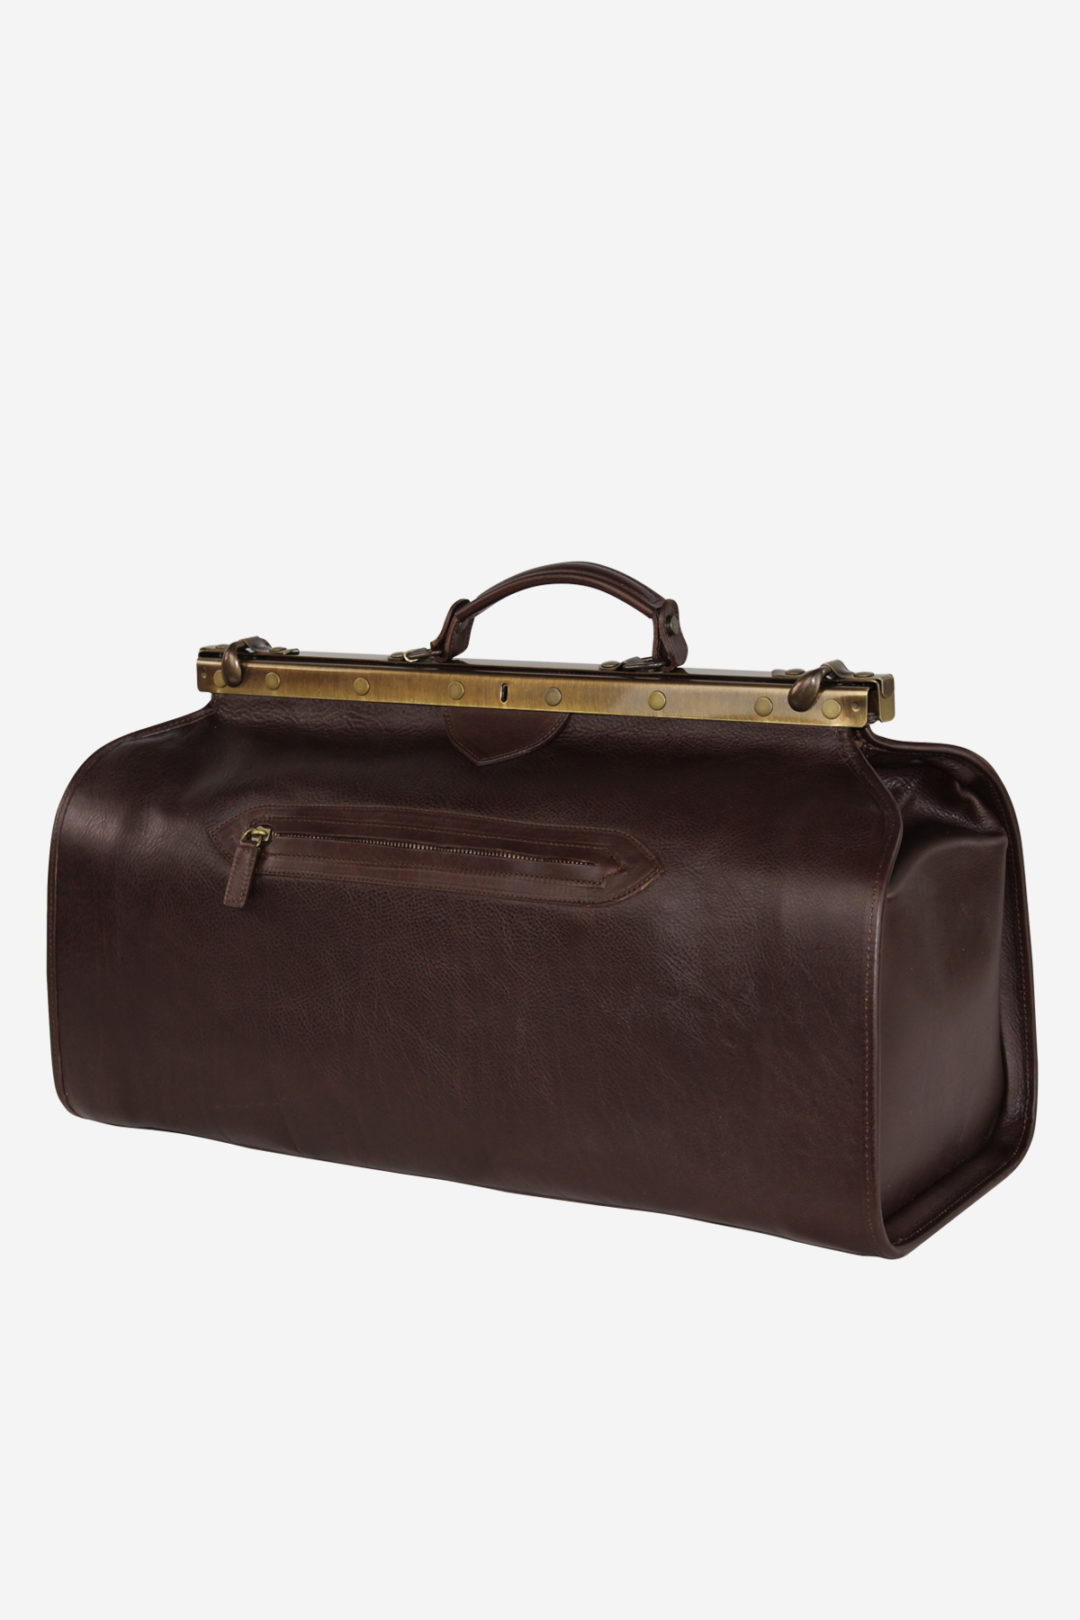 Doctor's Bag Terrida - Handmade in Italy, vegetable tanned leather